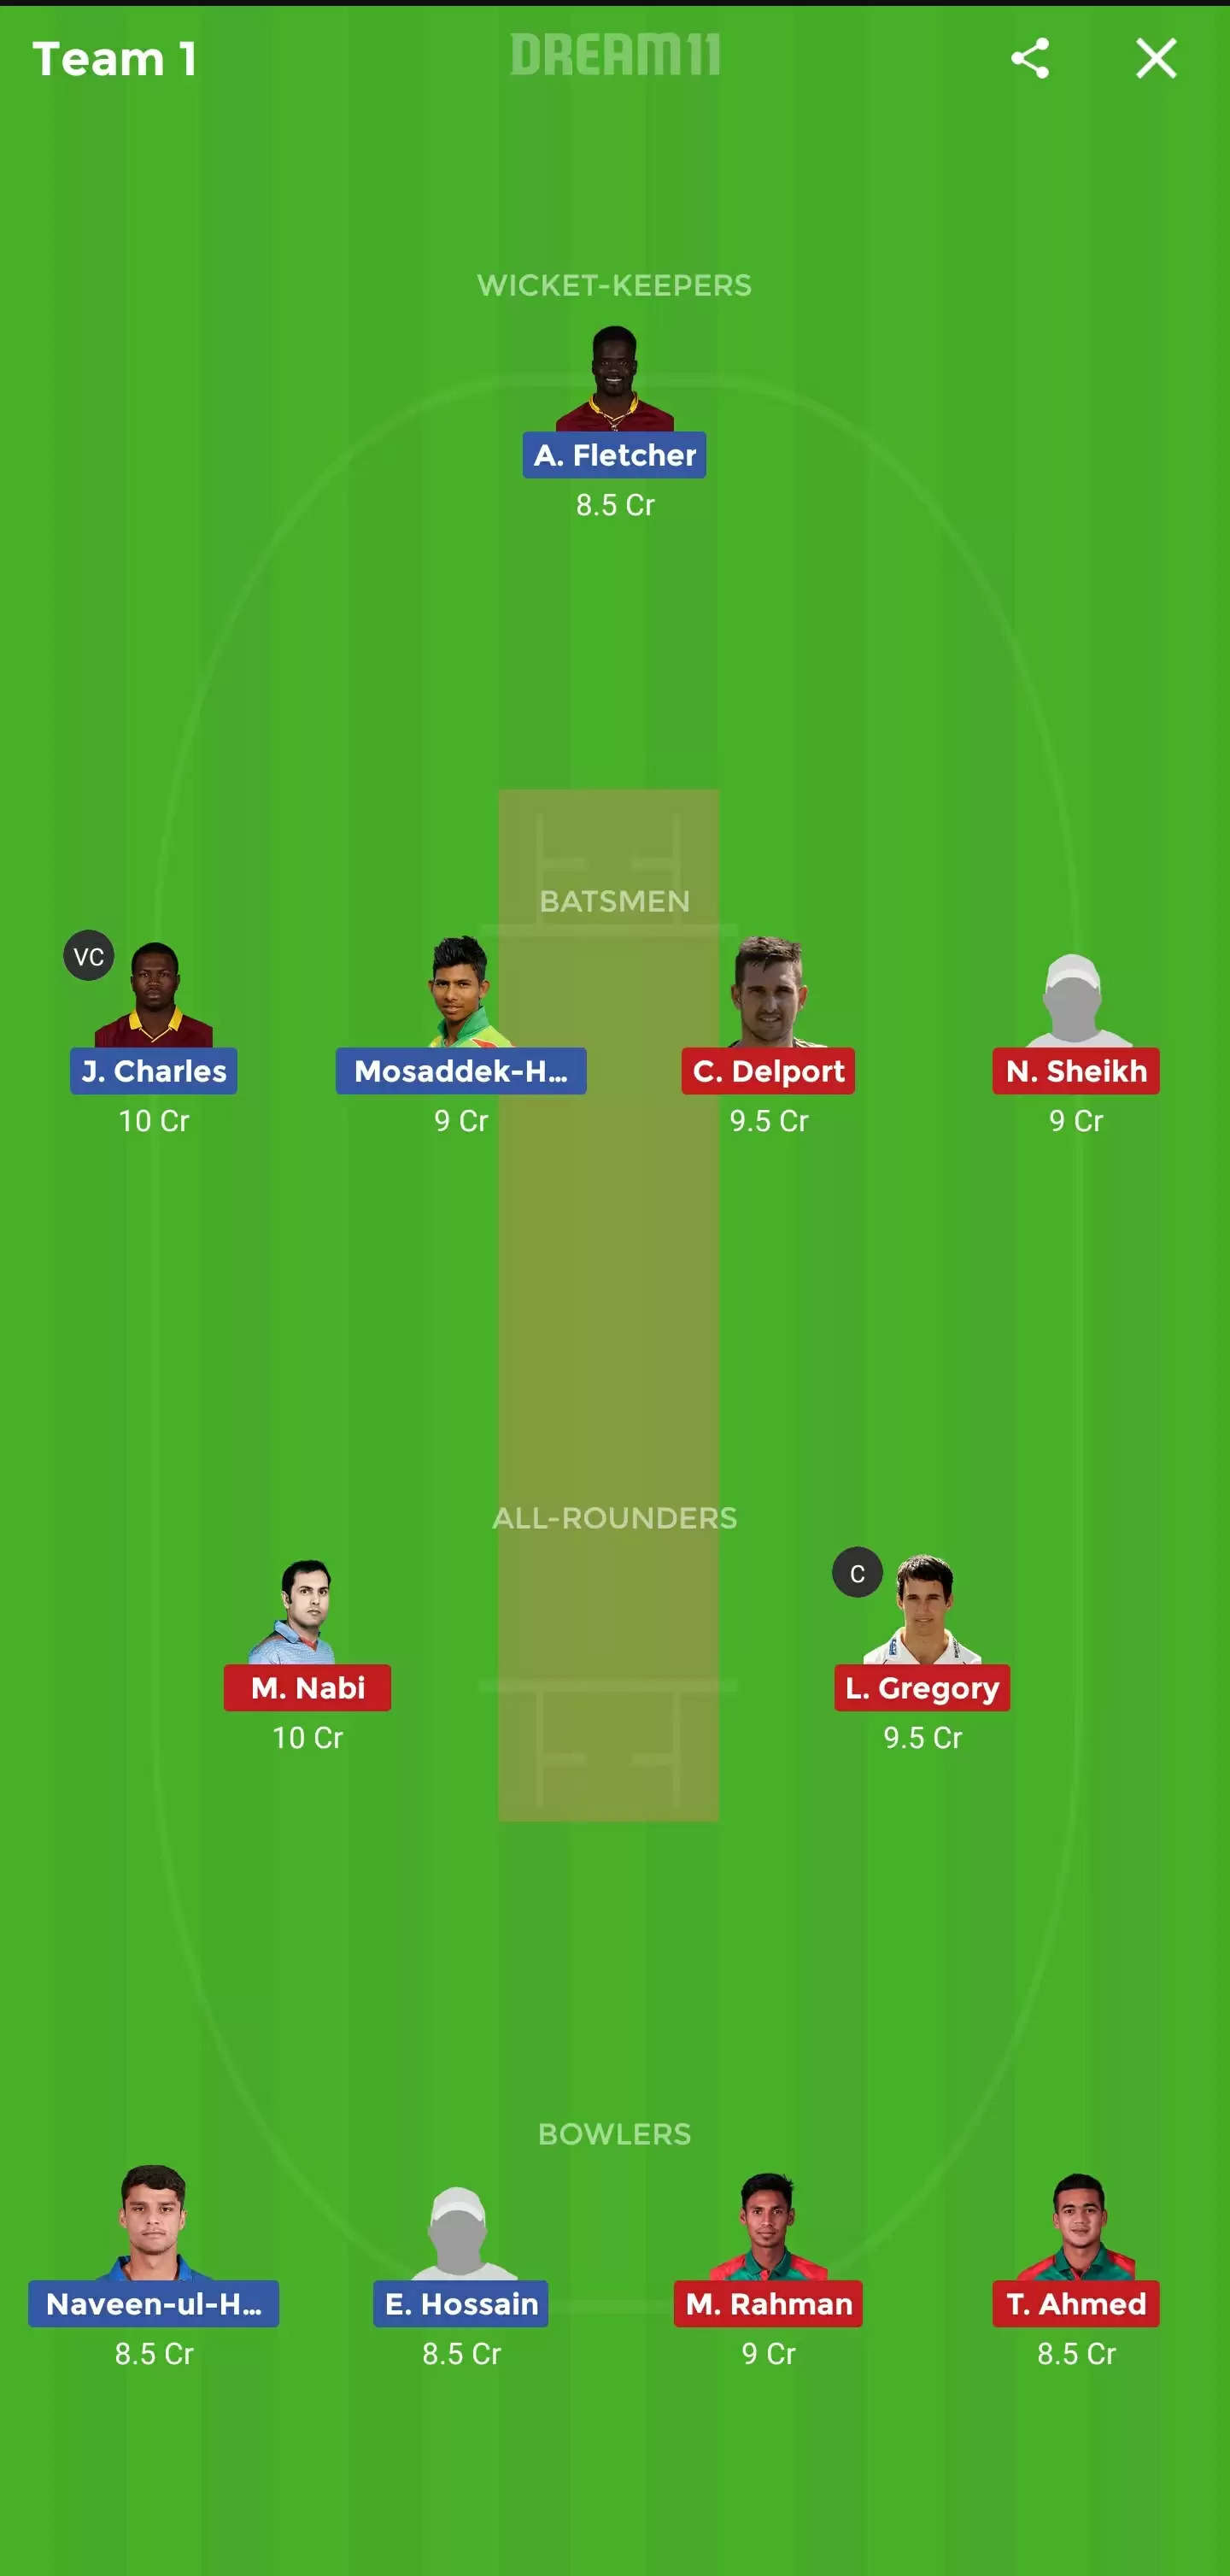 SYL vs RAN Dream11 Fantasy Cricket Prediction and Team | Match 32 of BPL 2019/20 : Sylhet Thunder vs Rangpur Rangers Dream11 Tips, Playing XI, Preview, Pitch Report and Weather Conditions